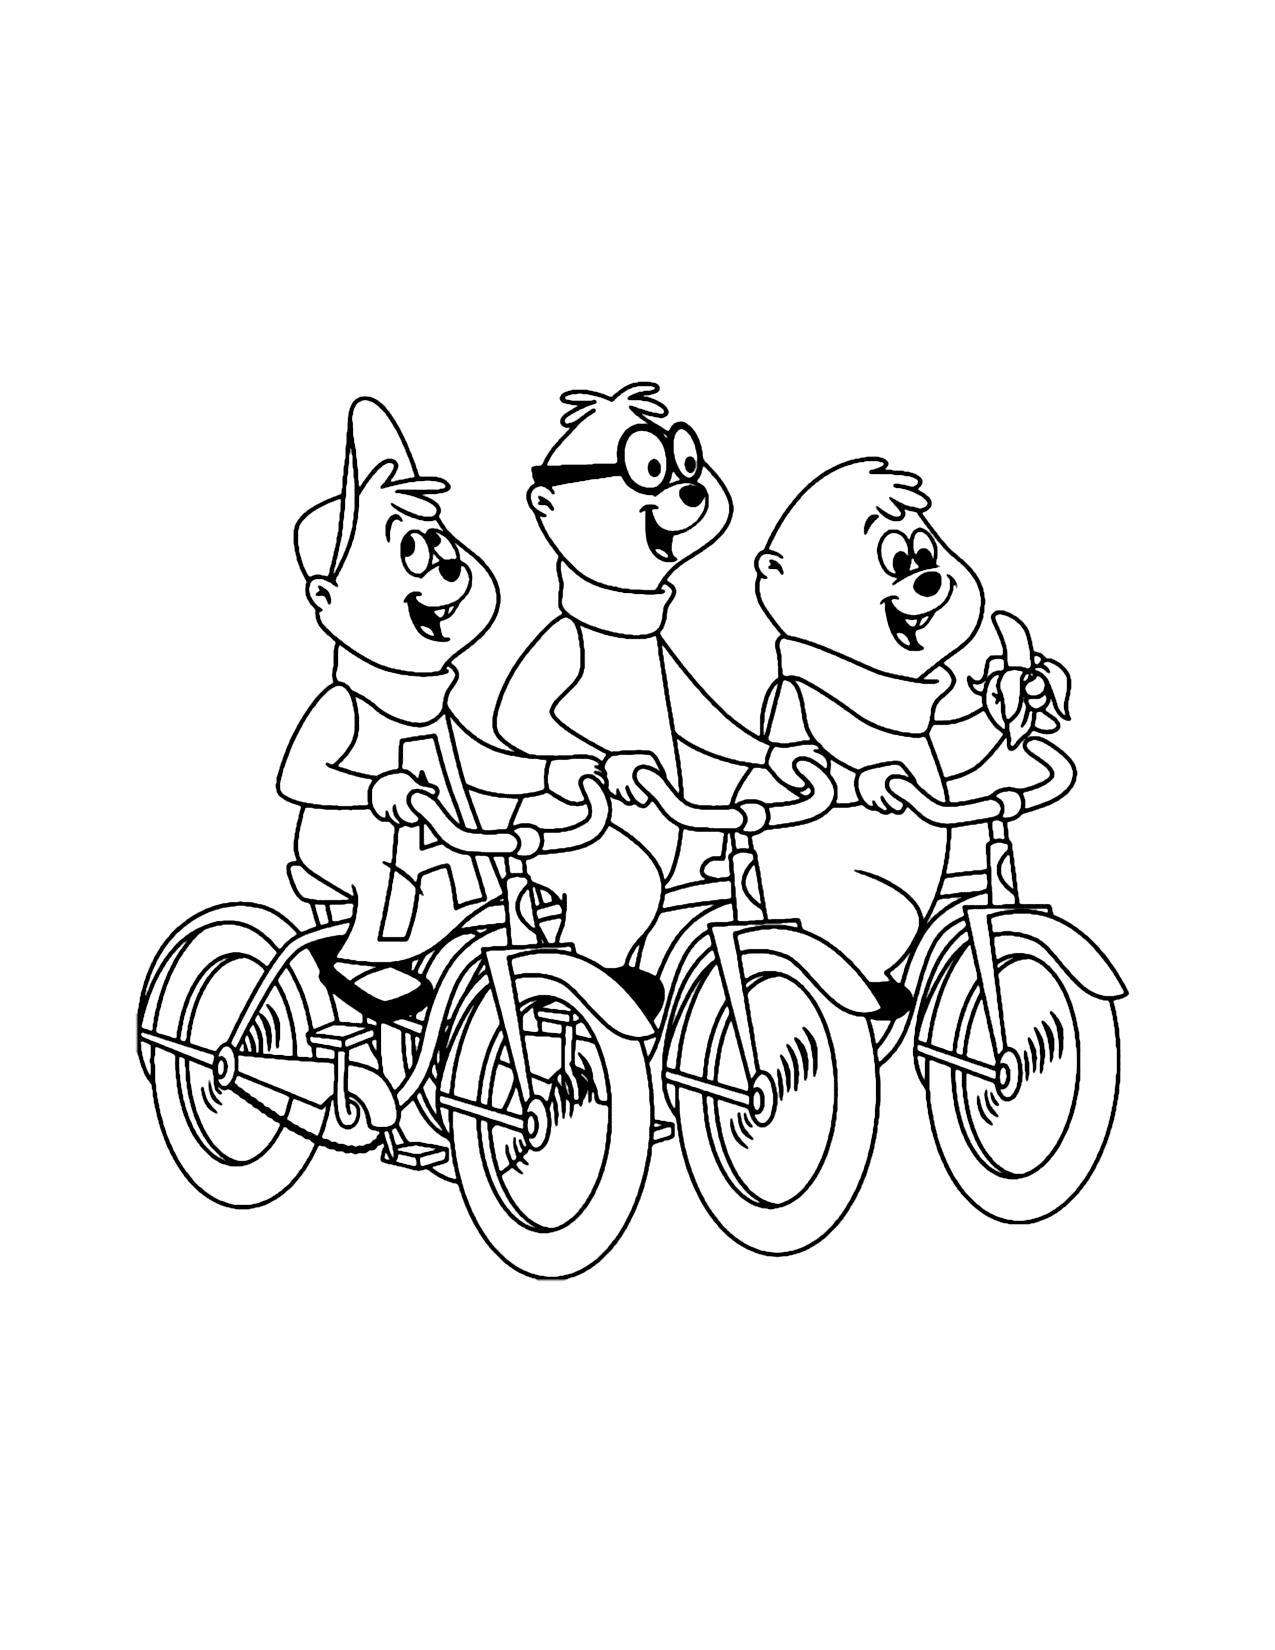 Old School Alvin And The Chipmunks Coloring Pages